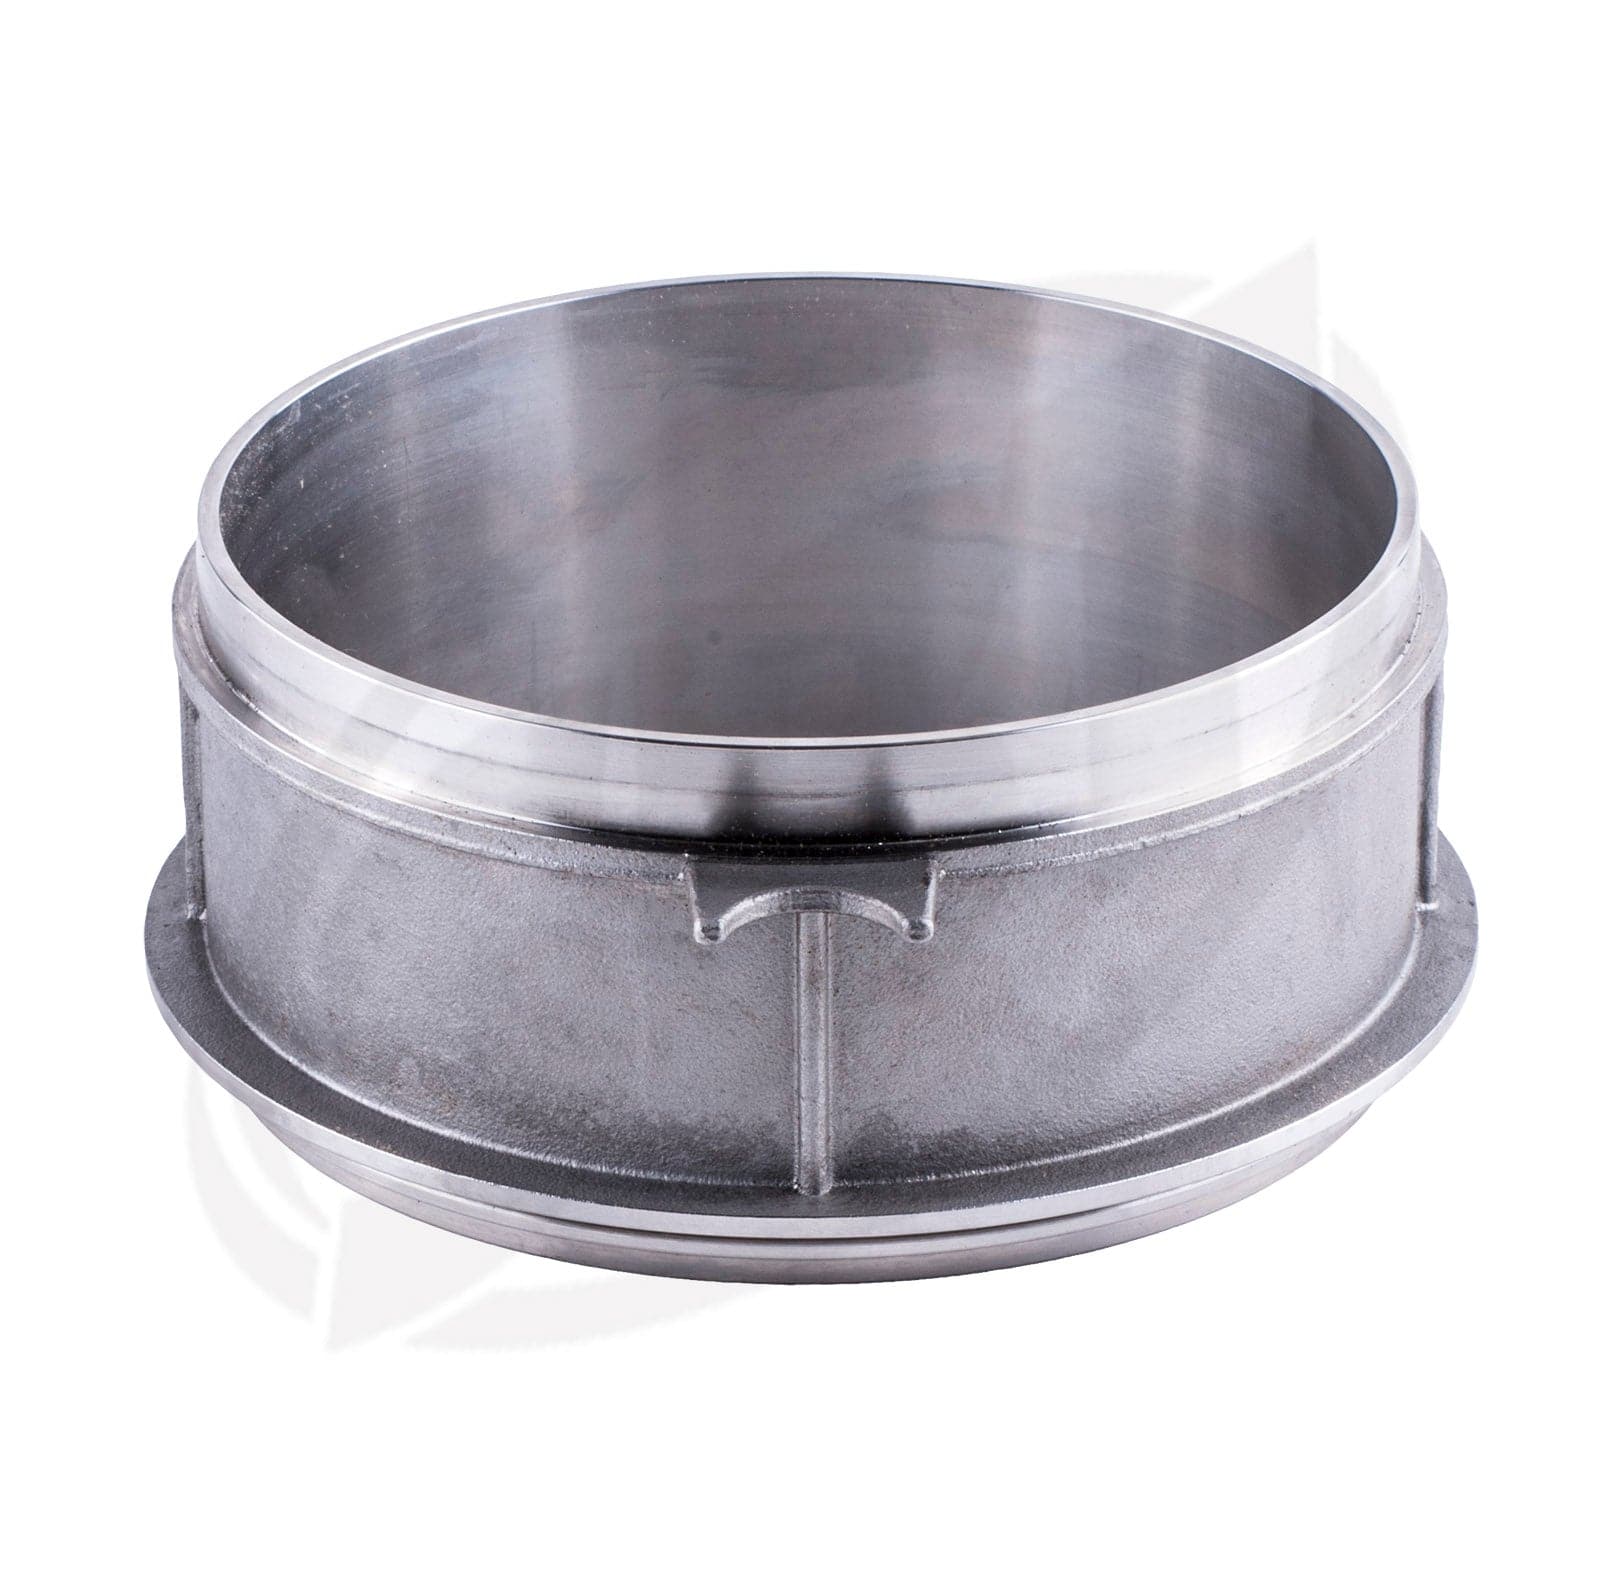 Replacement Stainless Steel Wear Ring for Sea-Doo Spark 267000617, 267000813 SK-HS-140